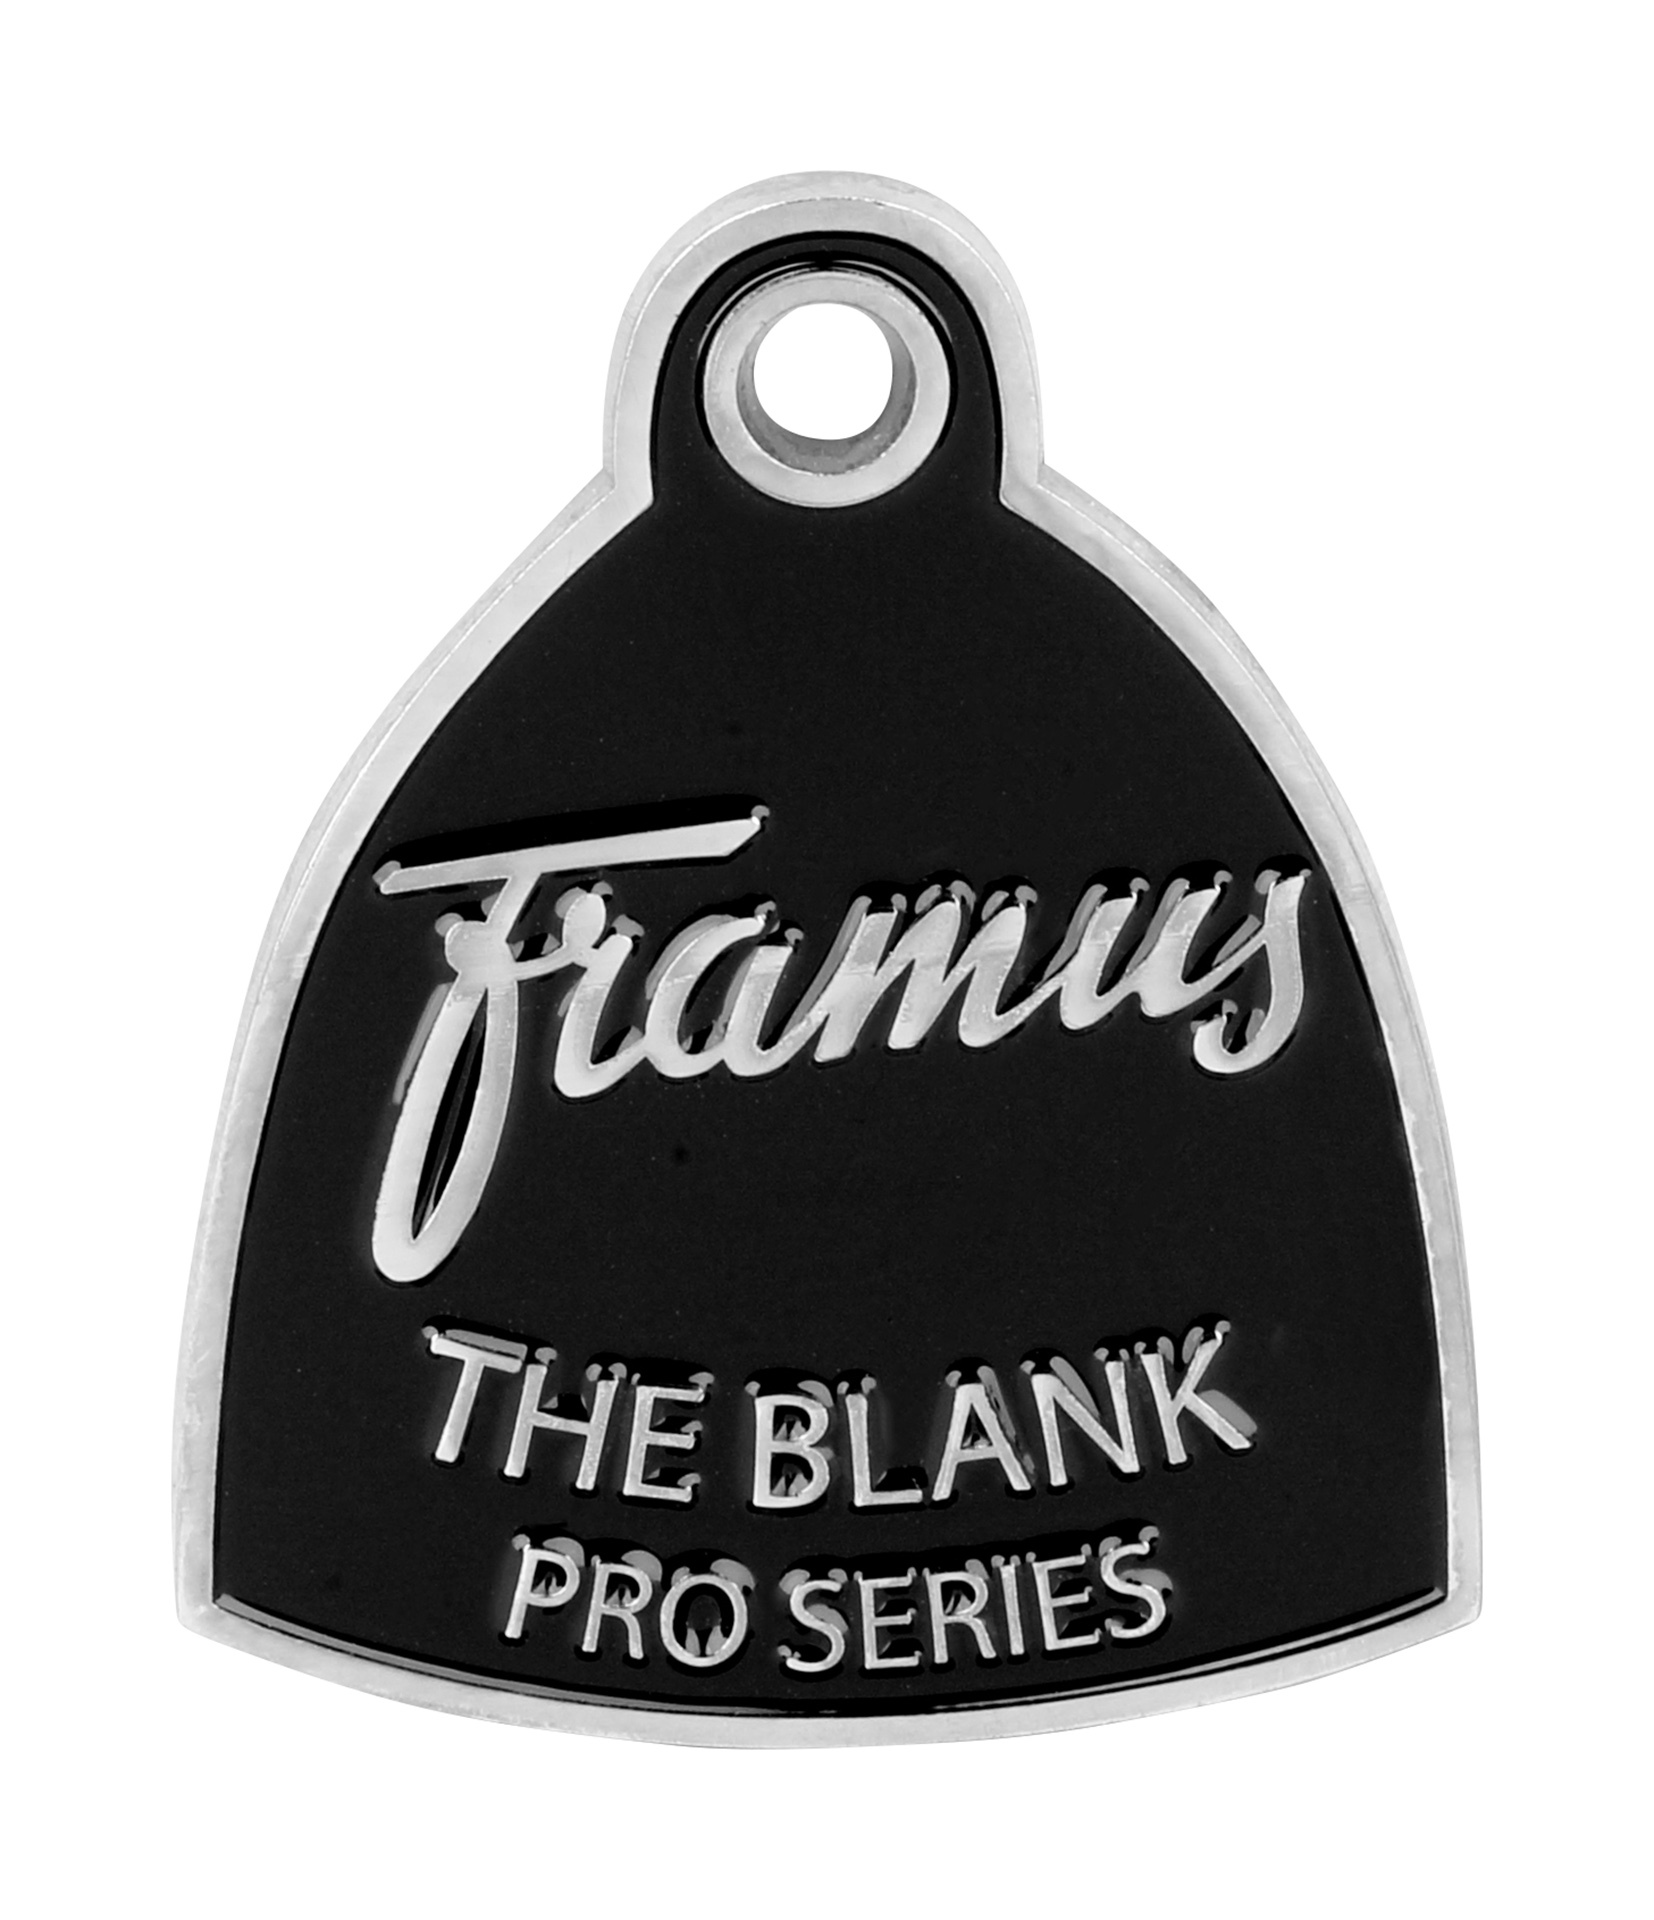 Trussrodcover Framus Pro Series The Blank